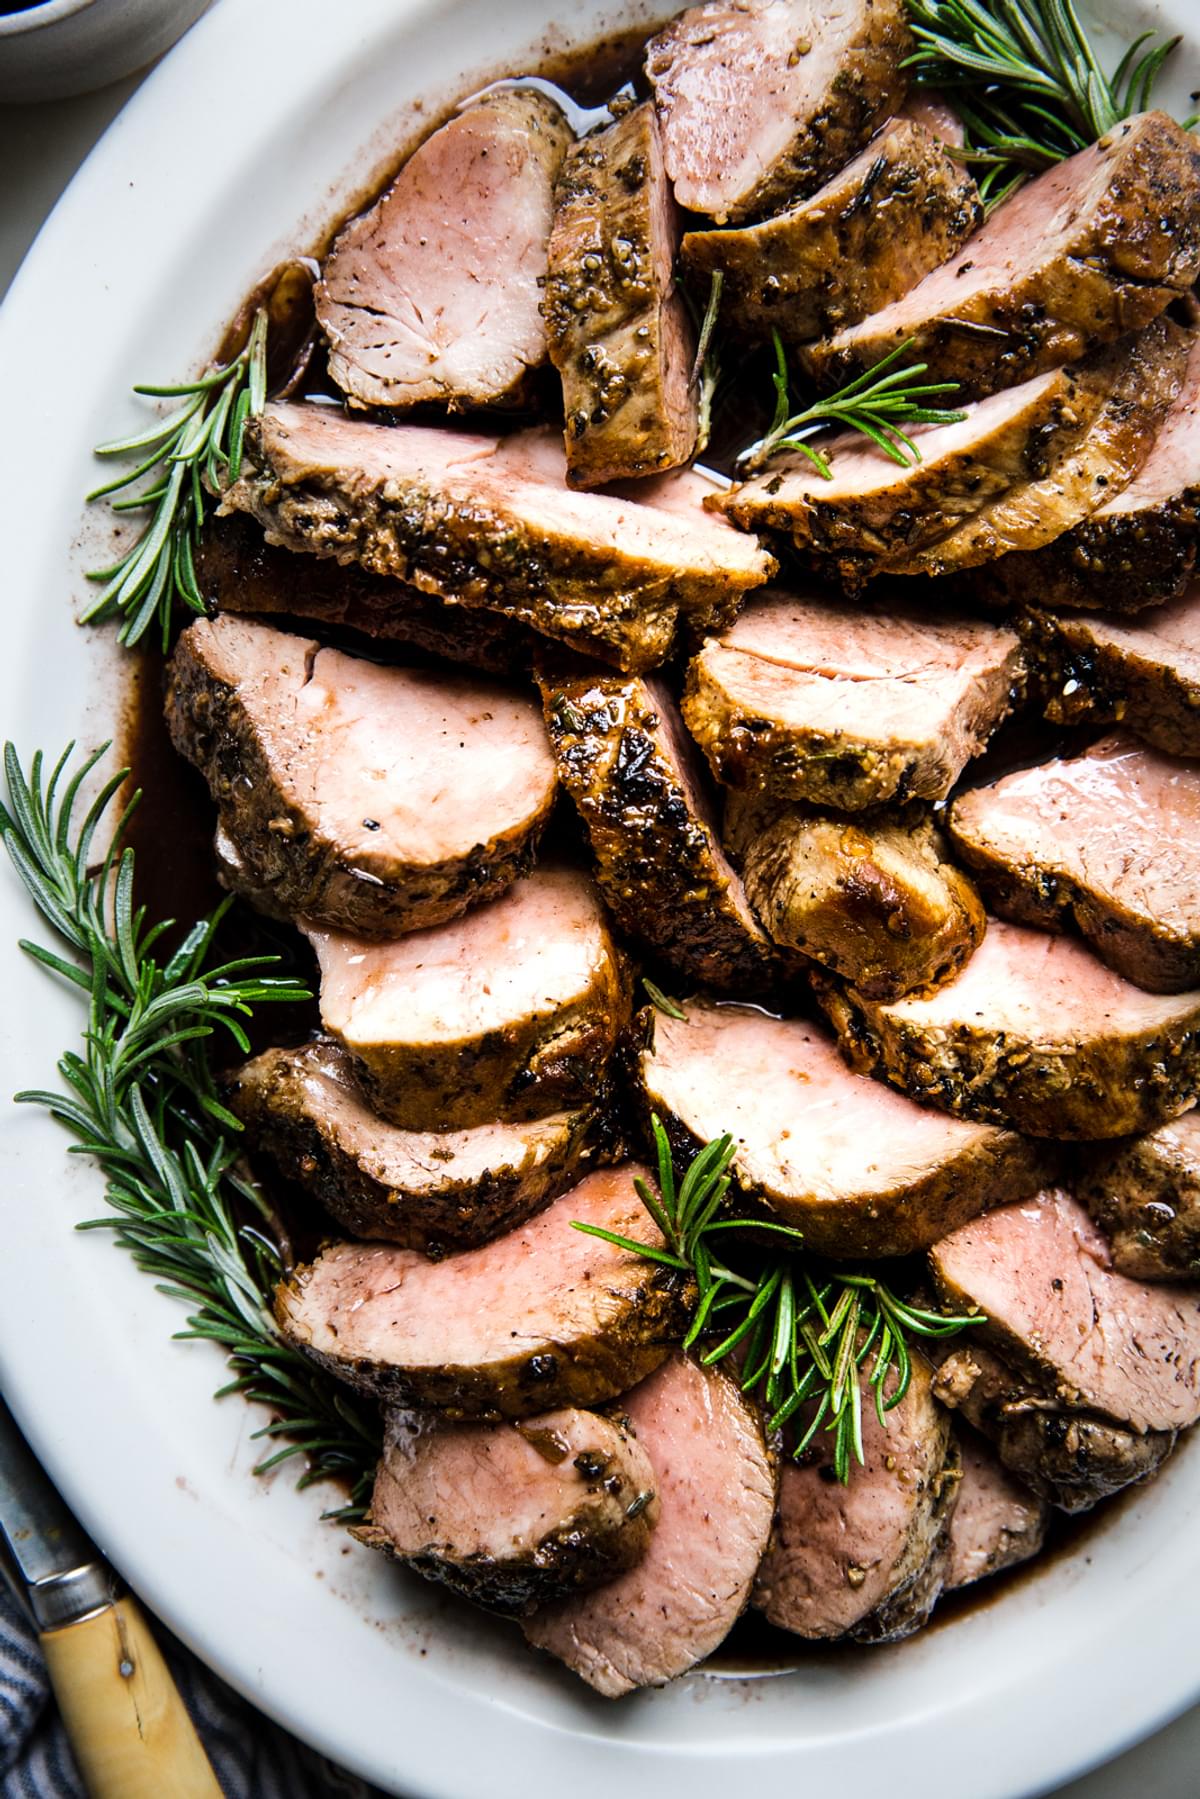 Herb crusted Pork Tenderloin with Port Wine Sauce on a white plate with rosemary